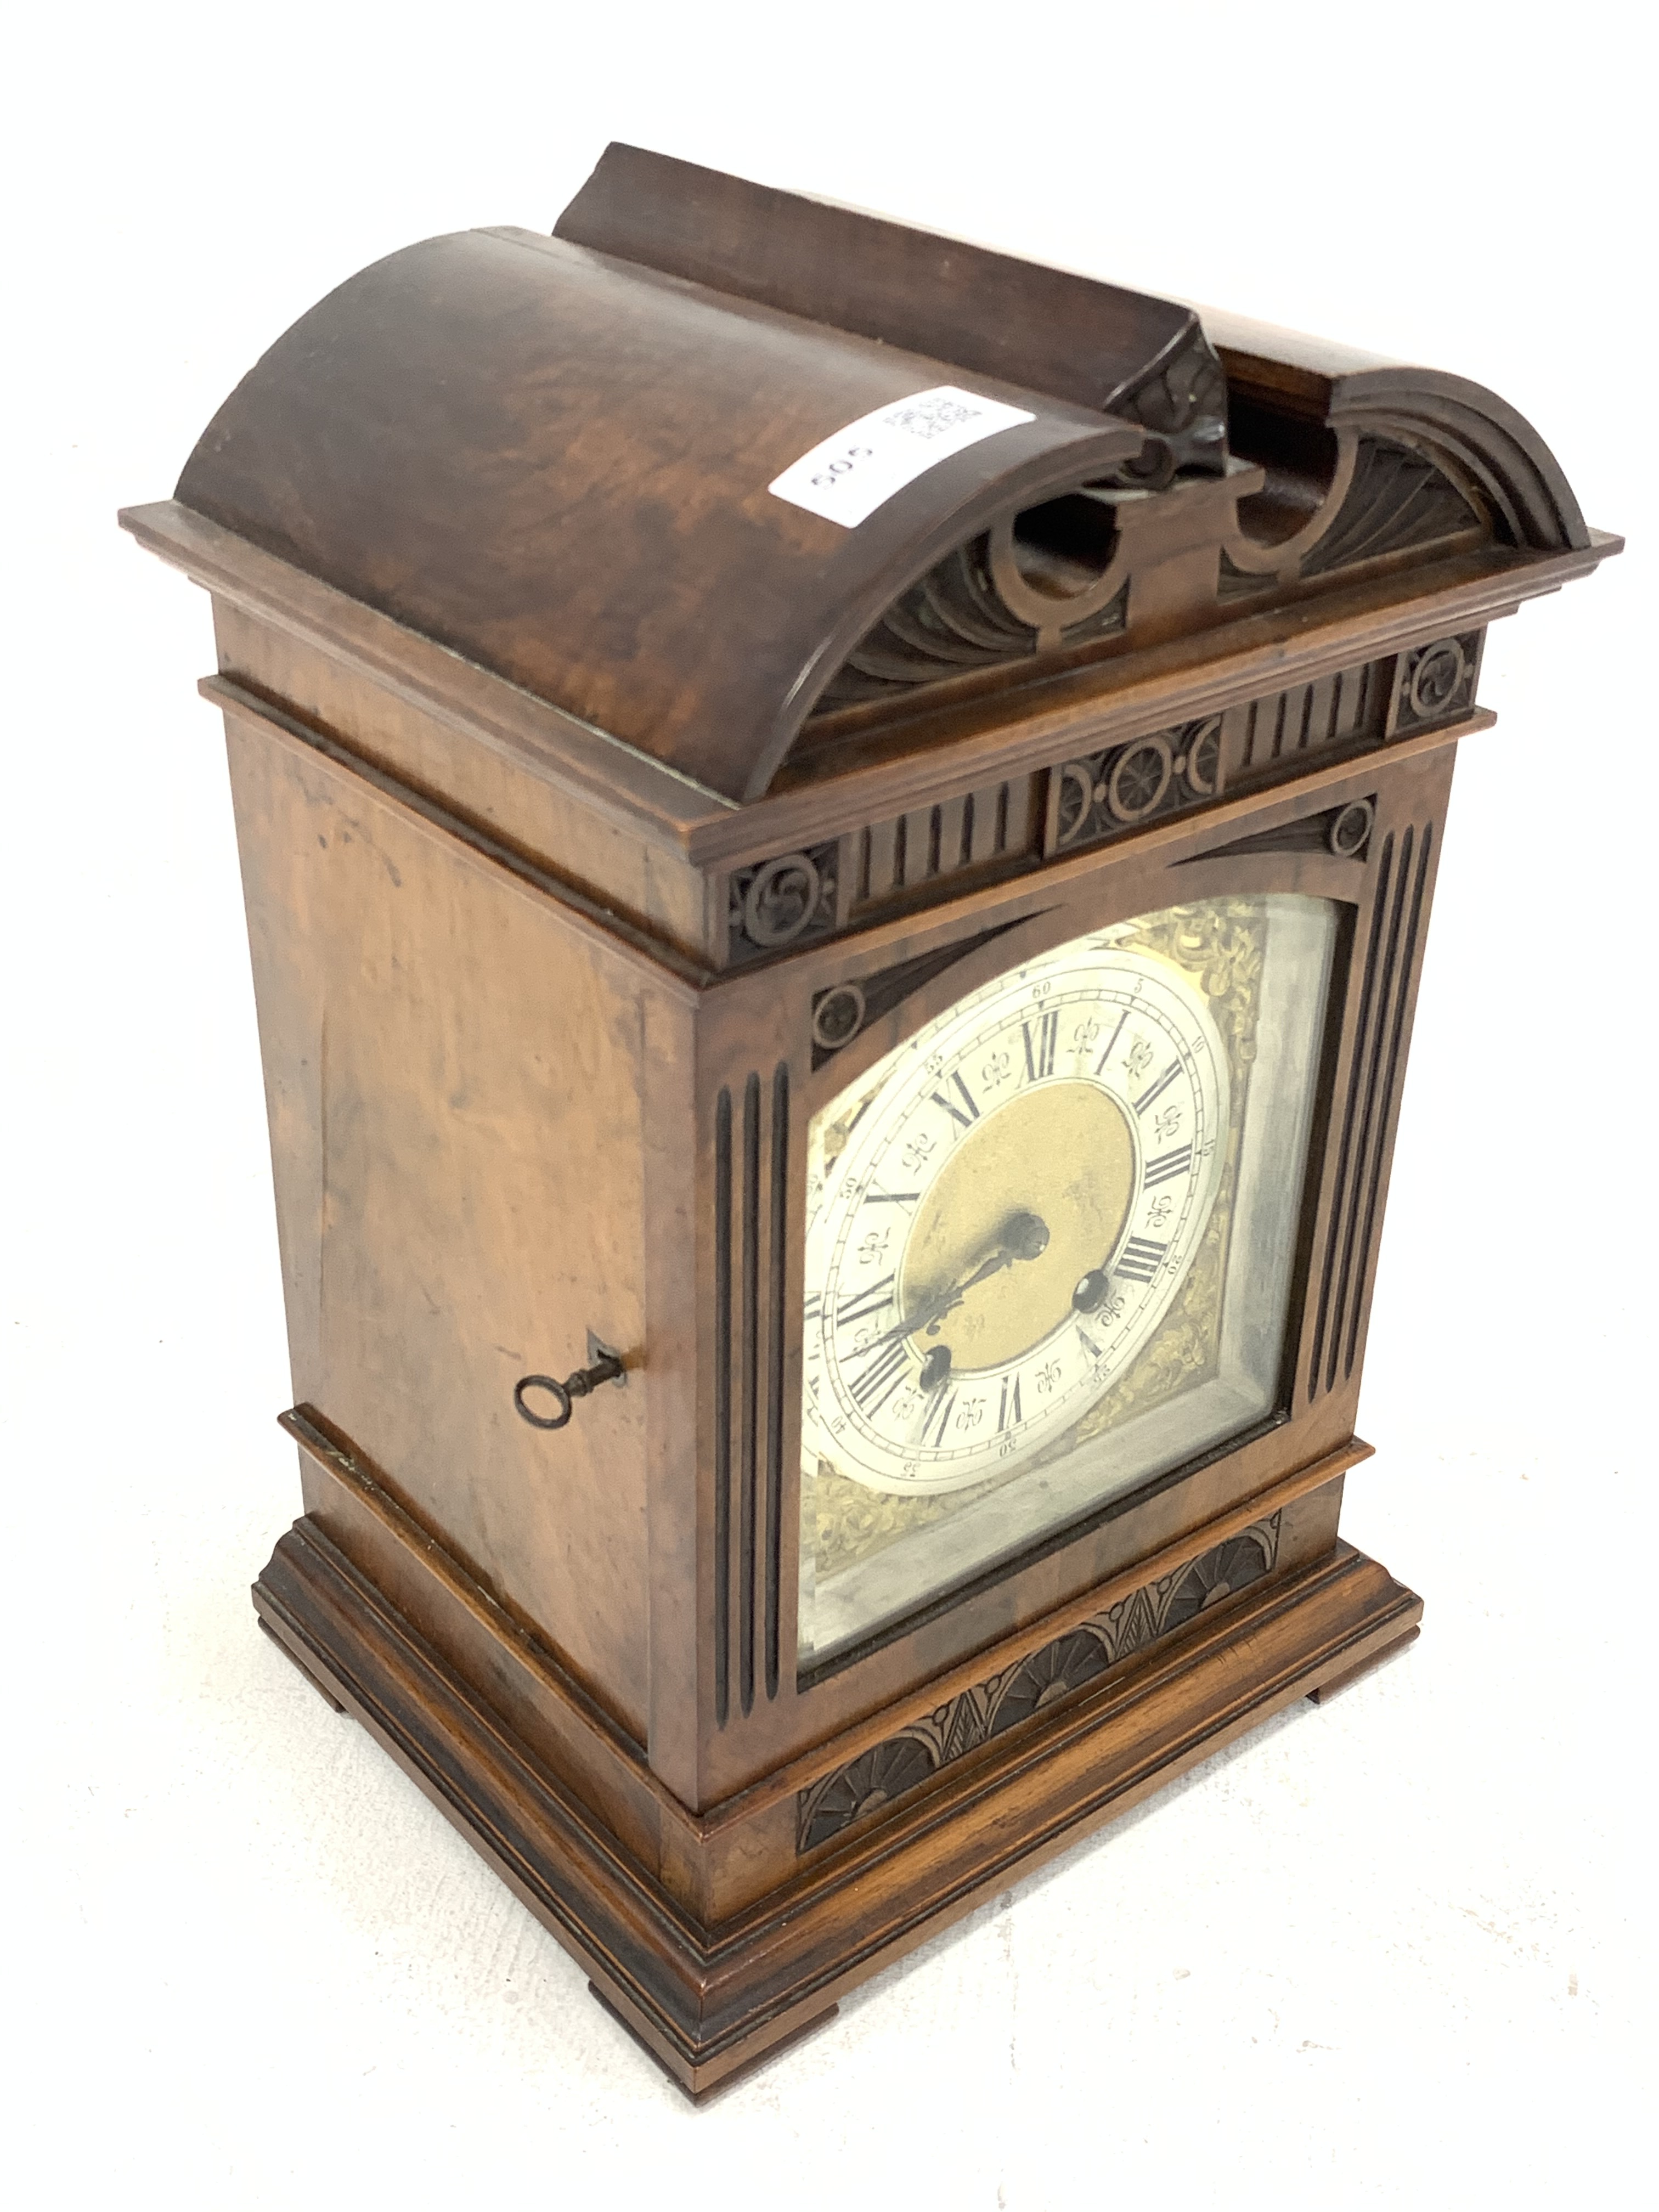 Late 19th century mantle clock in architectural walnut case, arched pediment with central leaf carve - Image 2 of 3